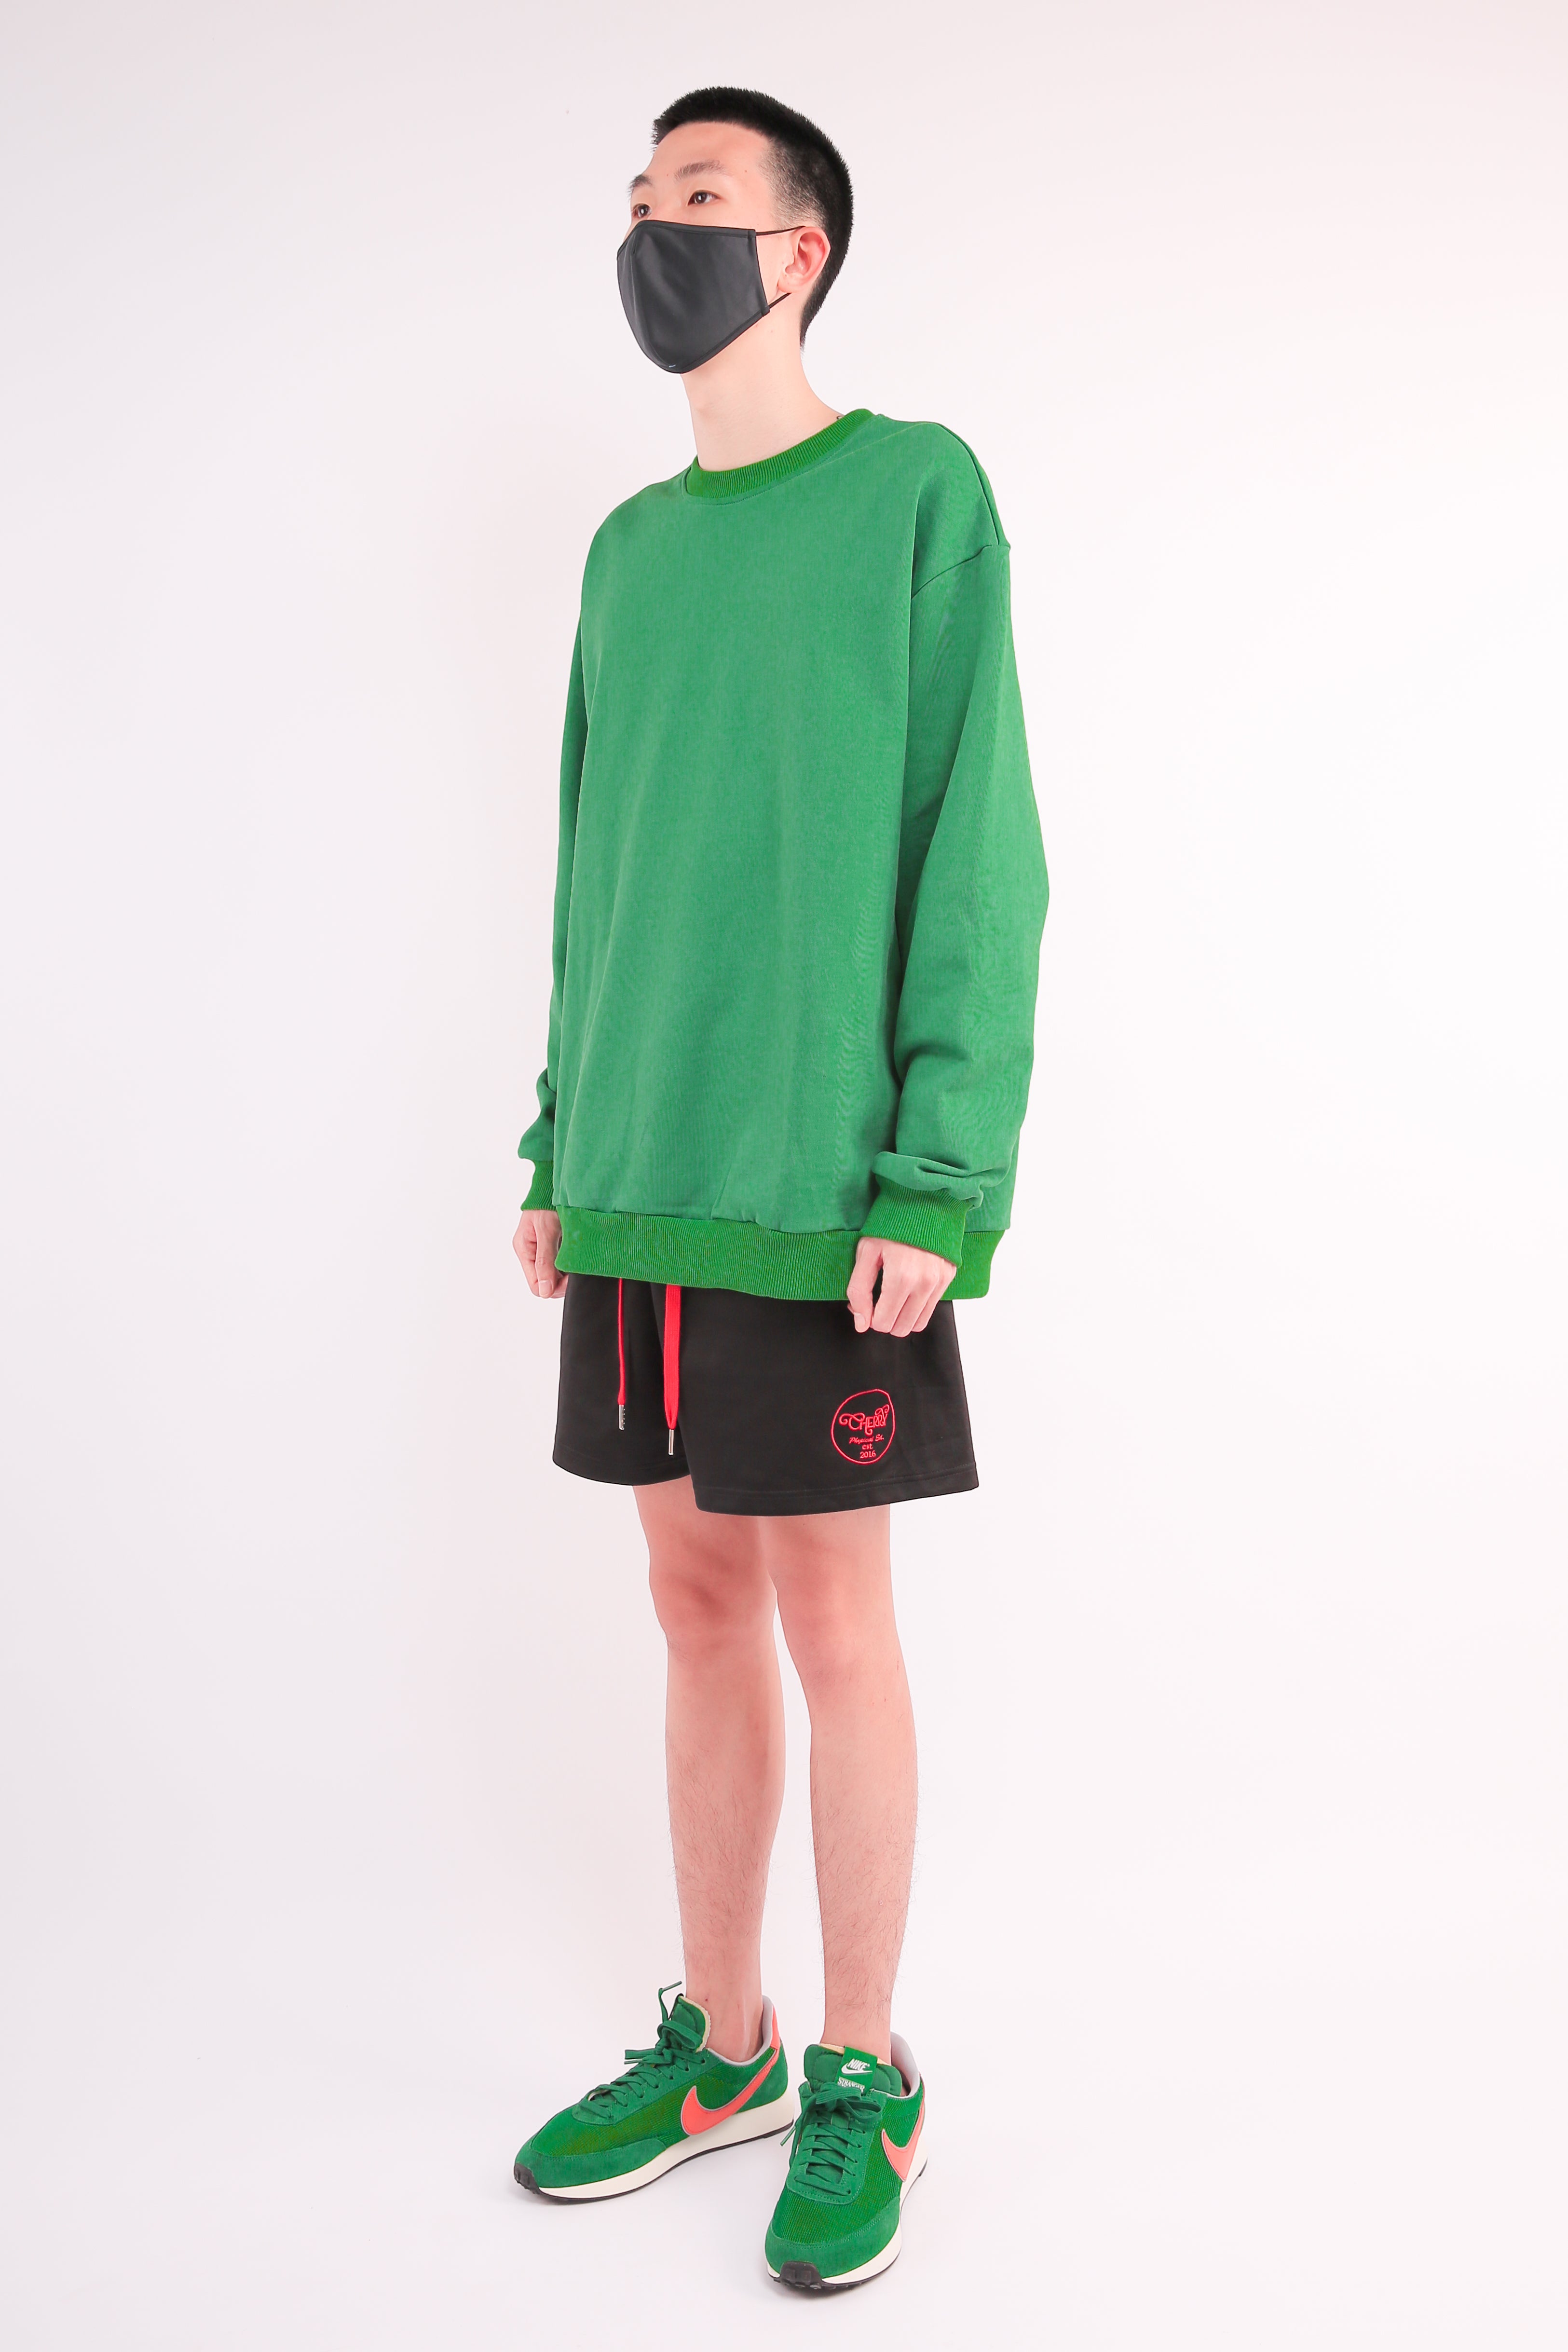 CHERRY DISCOTHEQUE - TOO SAINT SWEATER IN EMERALD GREEN